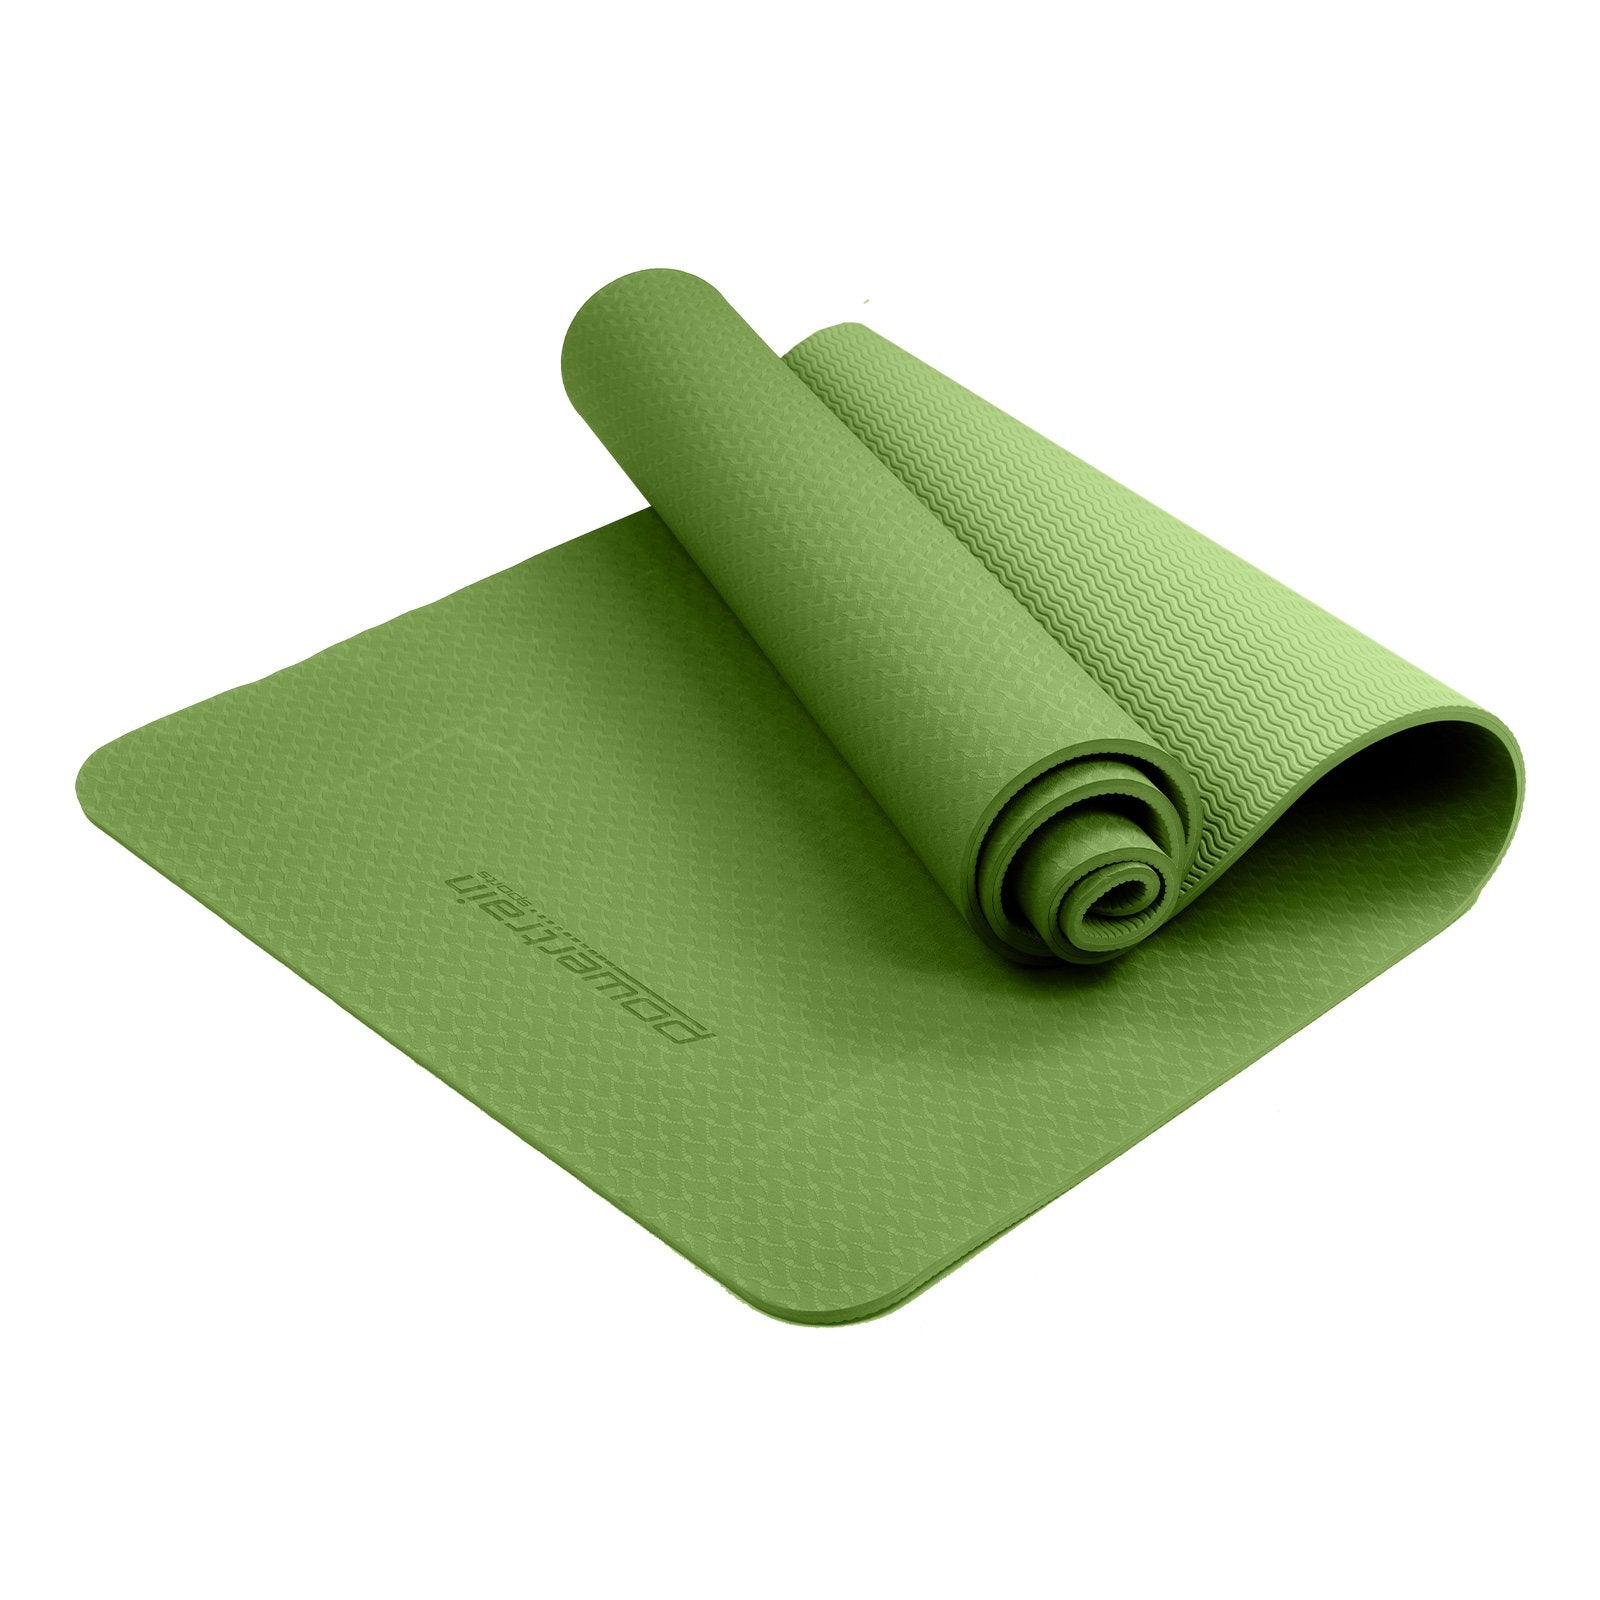 Eco-friendly Dual Layer 6mm Yoga Mat | Olive | Non-slip Surface And Carry Strap For Ultimate Comfort And Portability